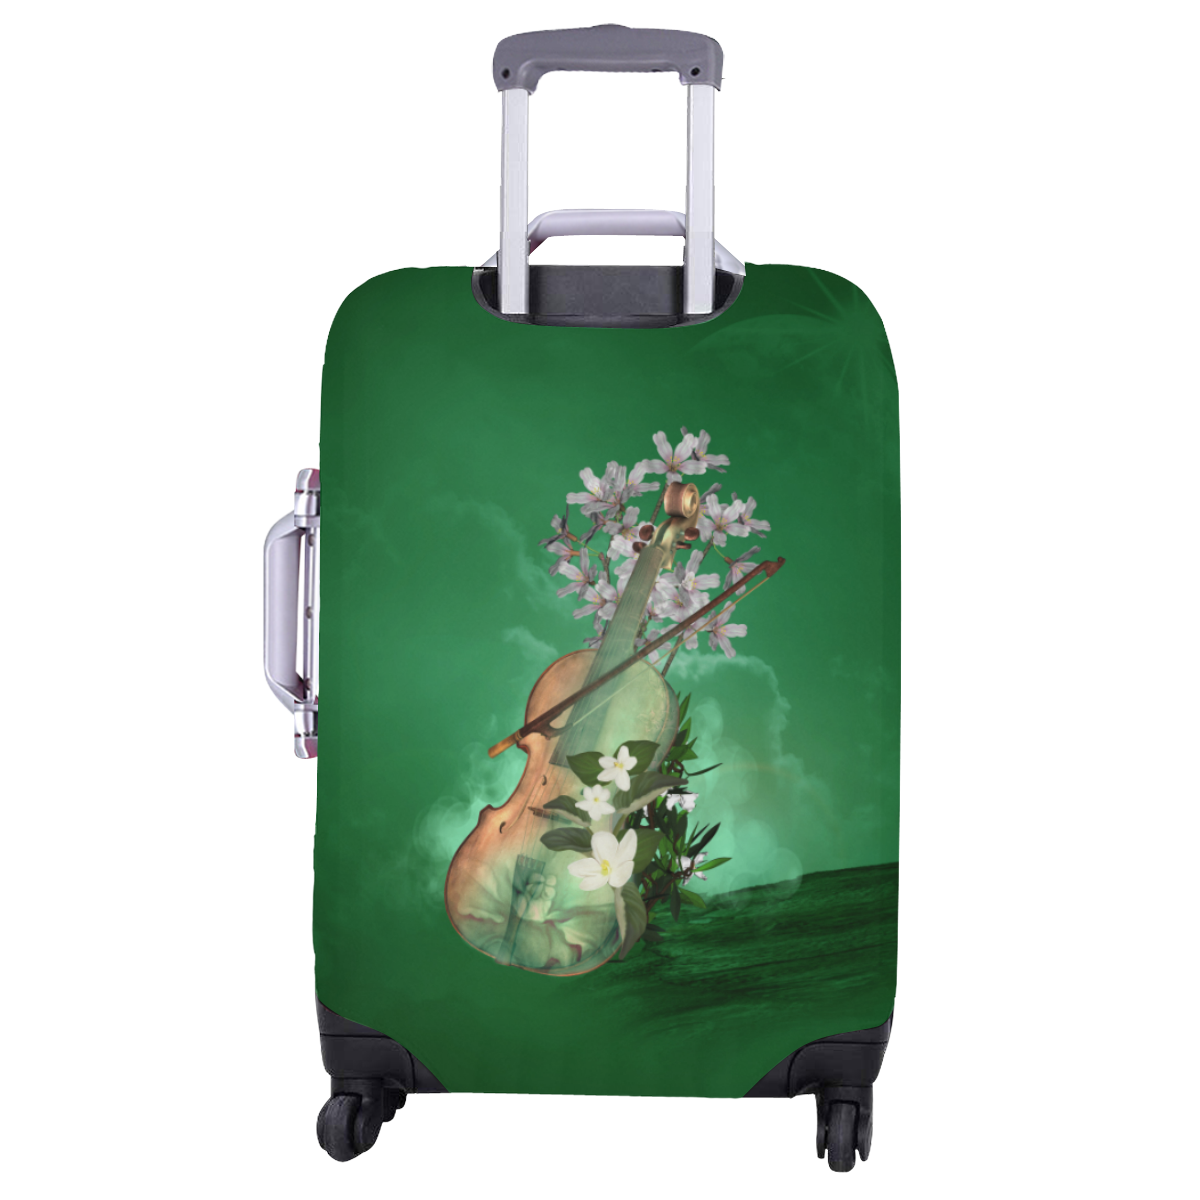 Violin with flowers Luggage Cover/Large 26"-28"